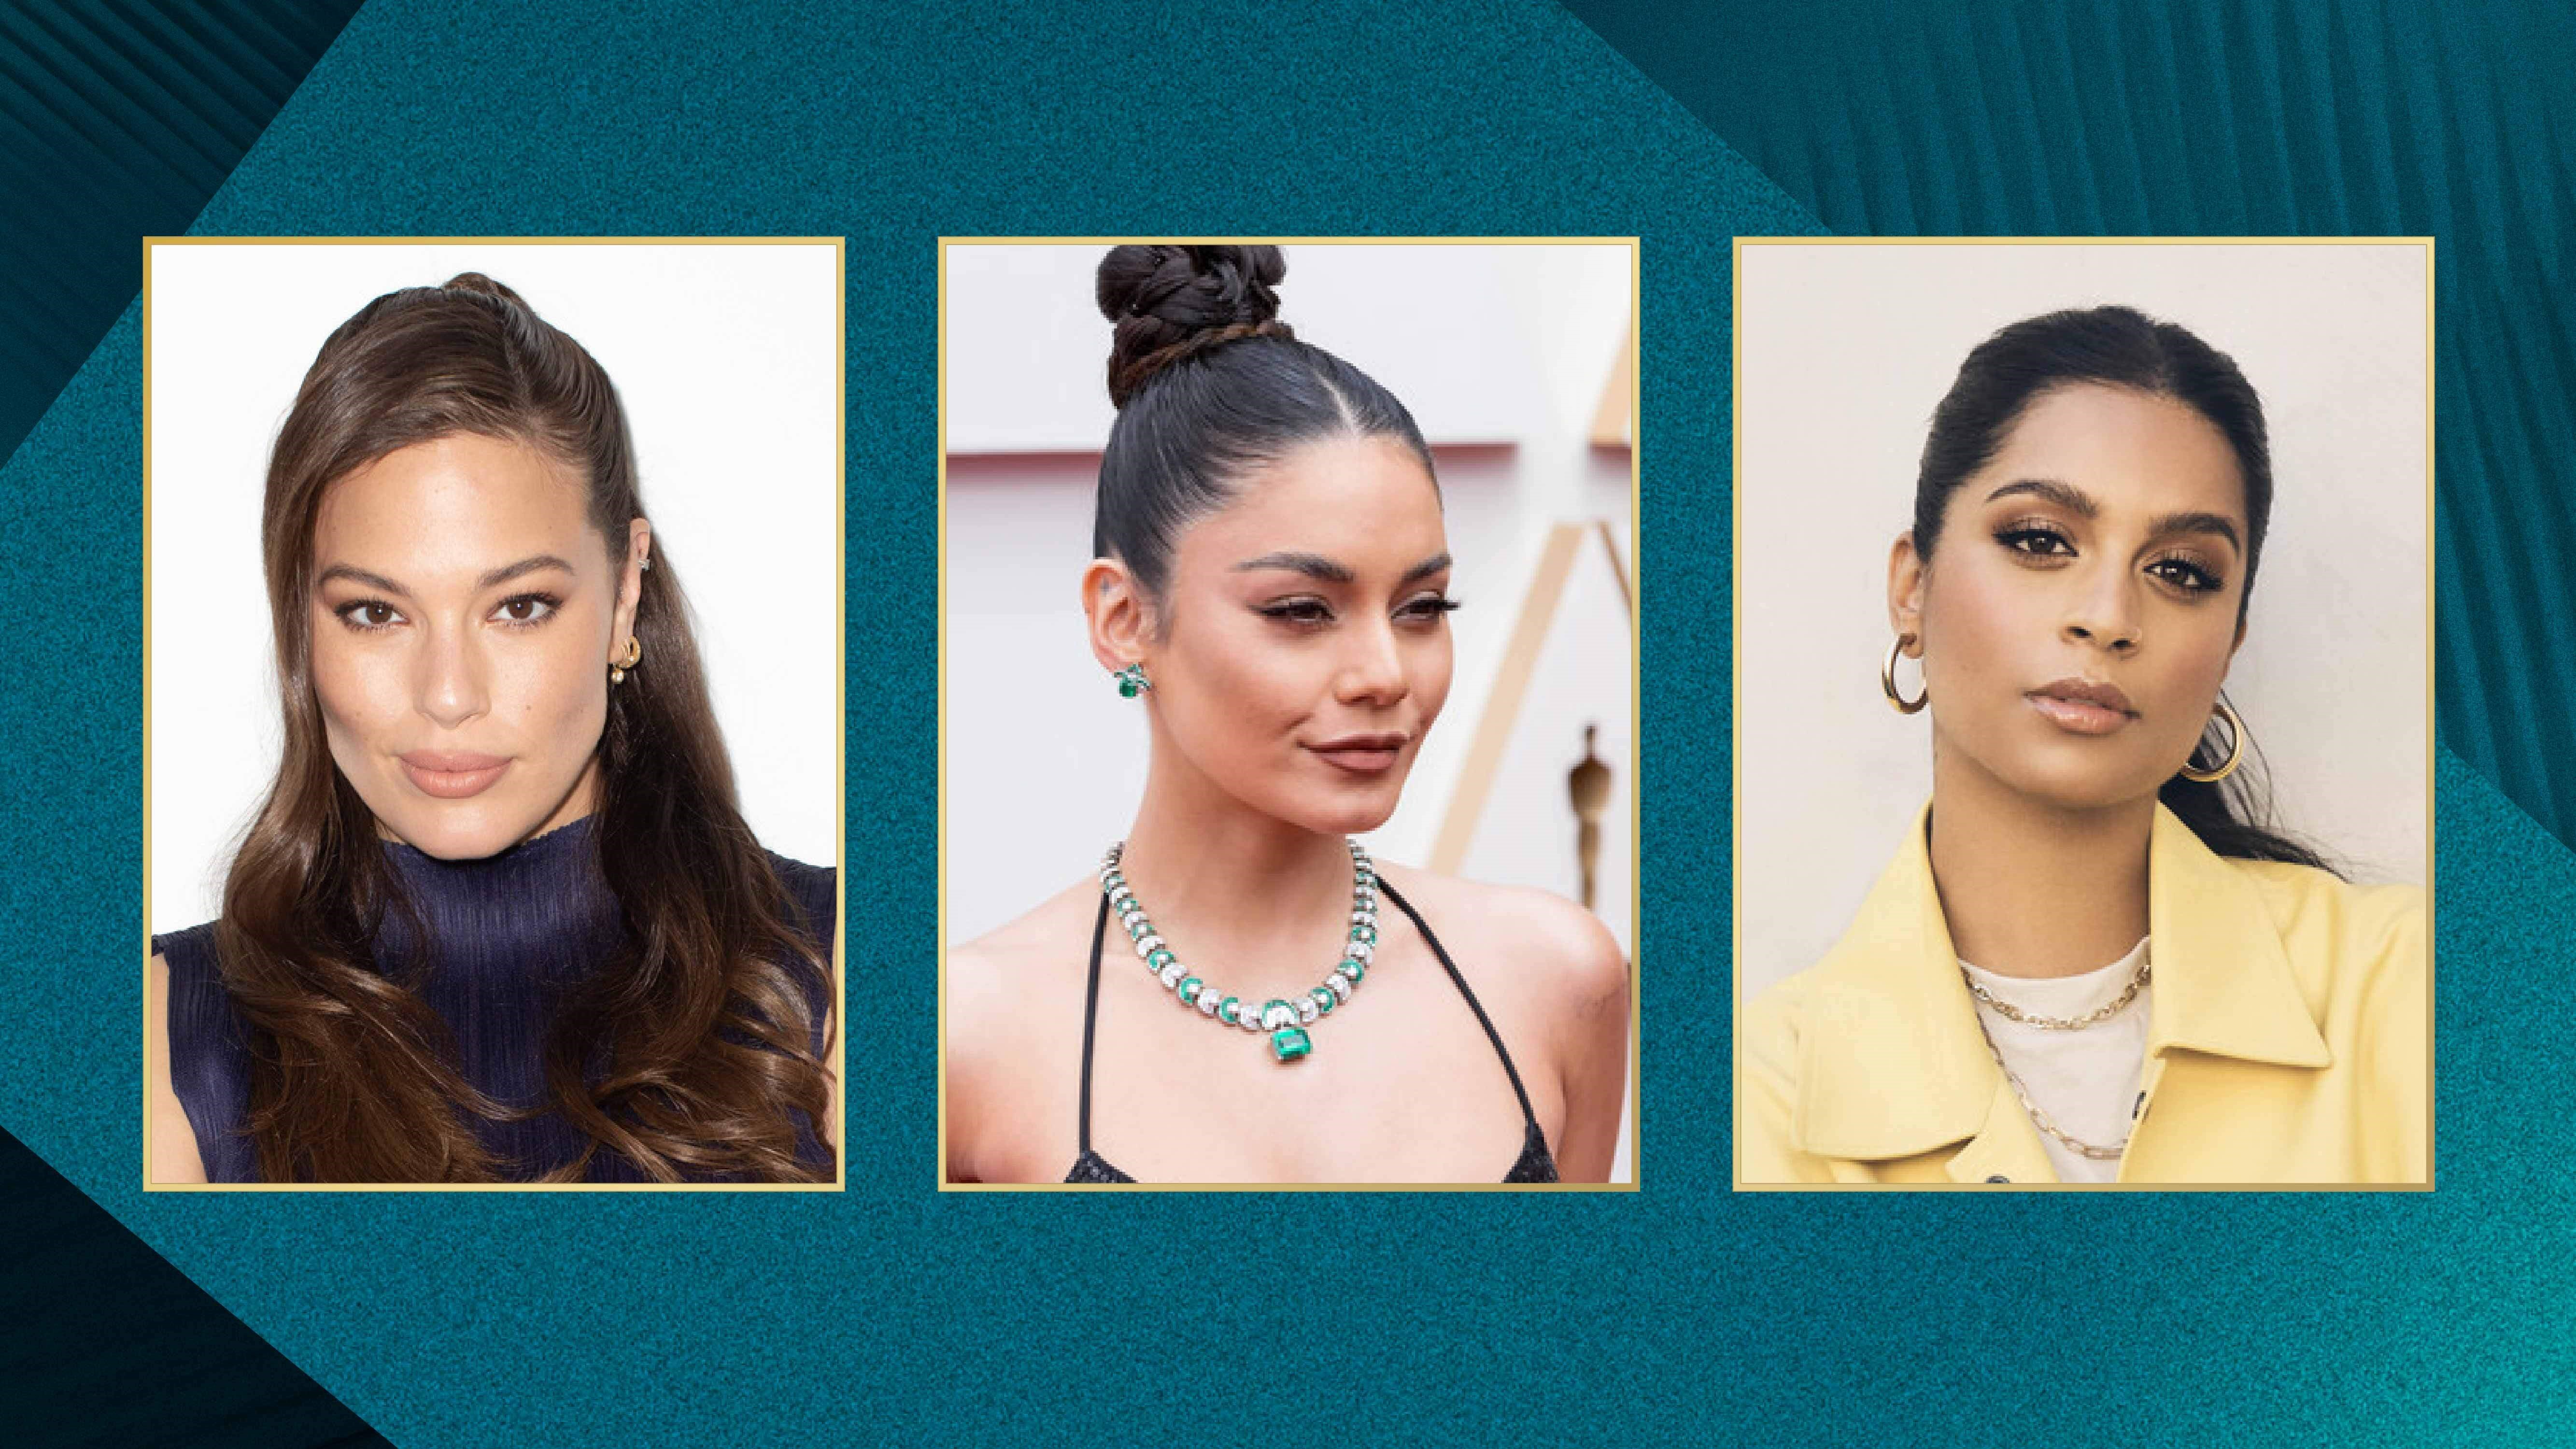 ASHLEY GRAHAM, VANESSA HUDGENS AND LILLY SINGH  TO HOST ‘COUNTDOWN TO THE OSCARS®,’ MARCH 12 ON ABC